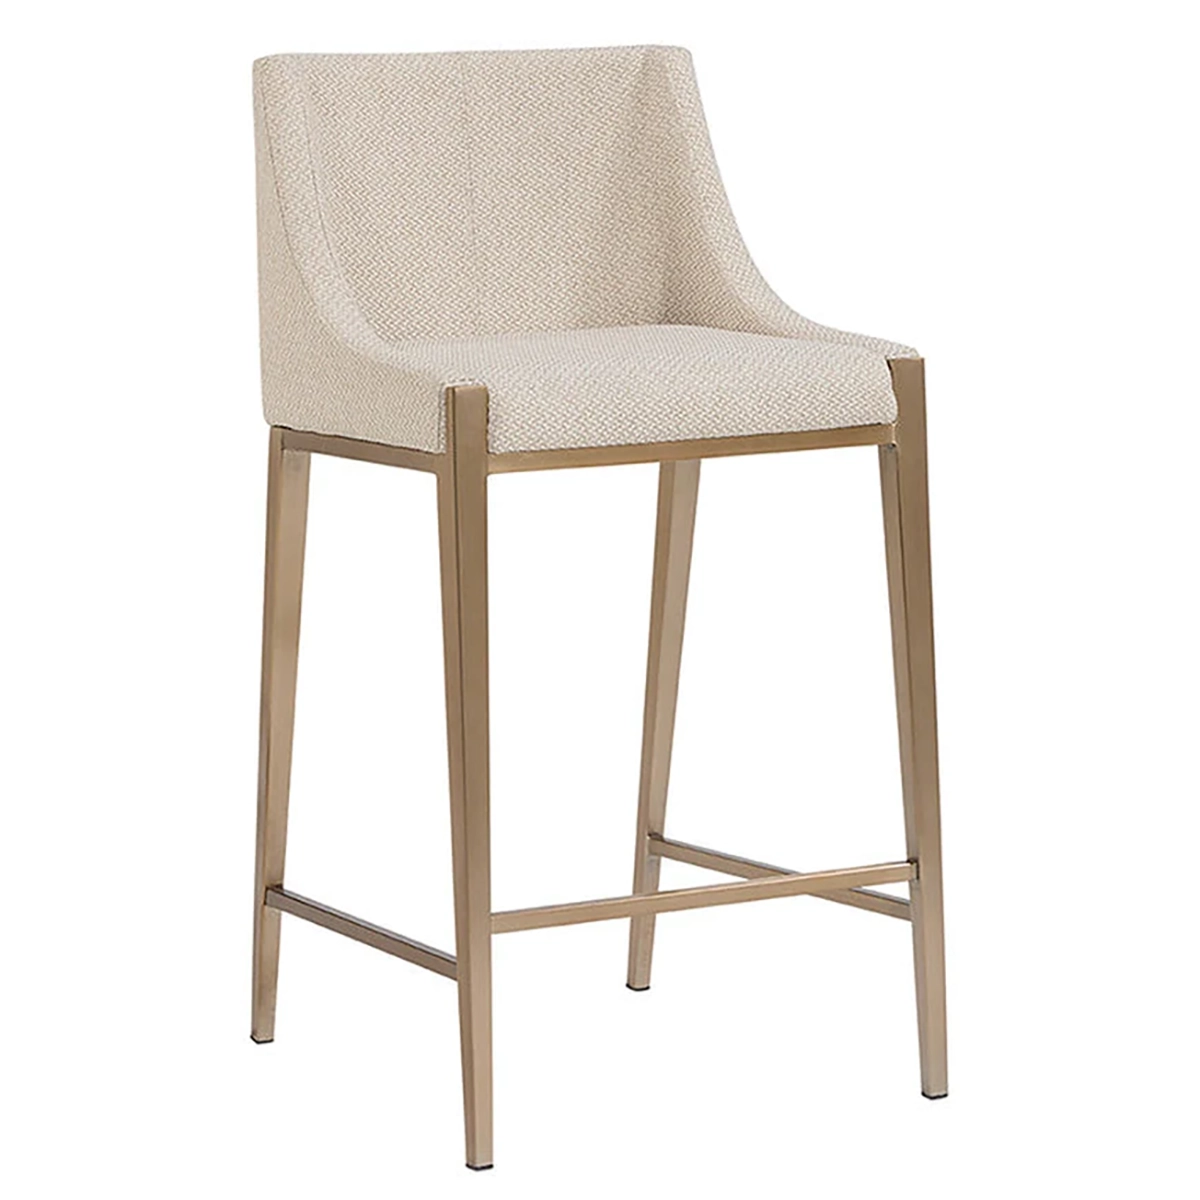 Thea Upholstered Counter Stool